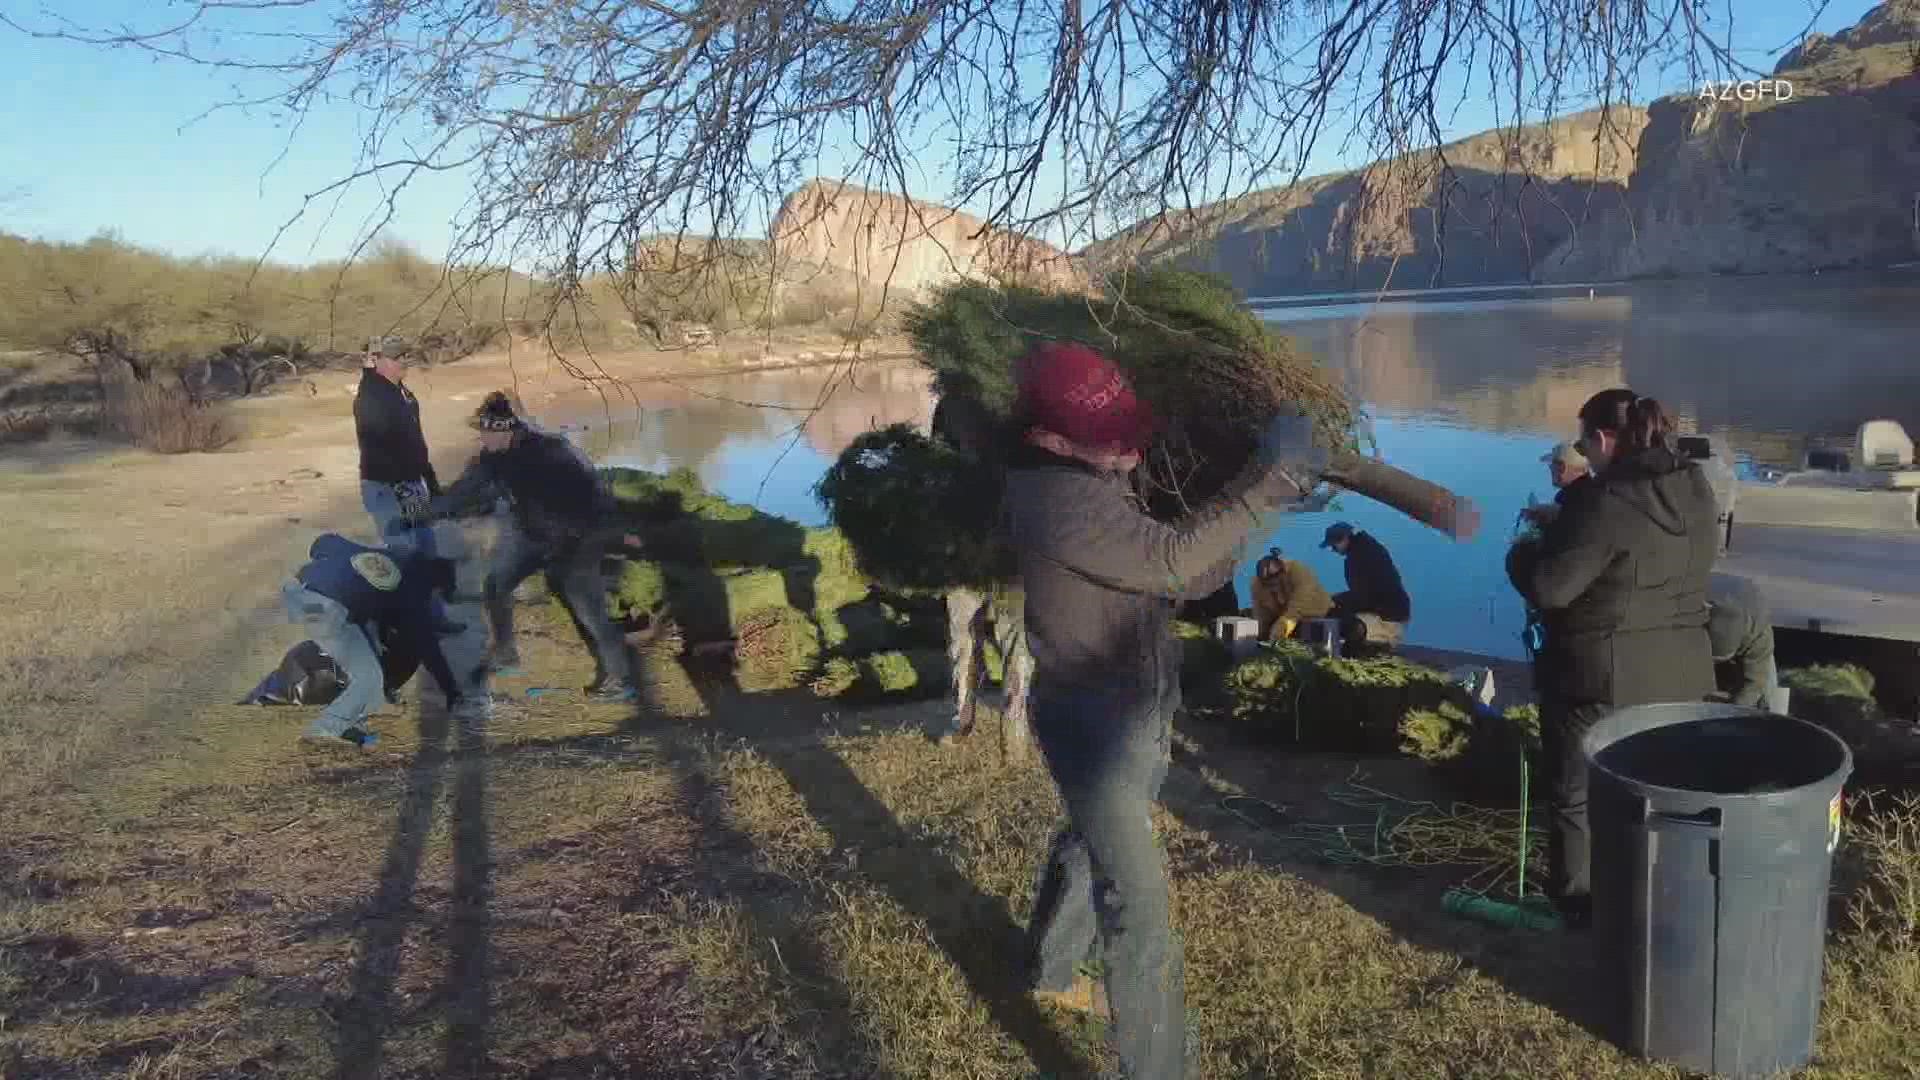 On Saturday, hundreds of old Christmas trees were tossed into Canyon Lake to serves as new homes for fish.